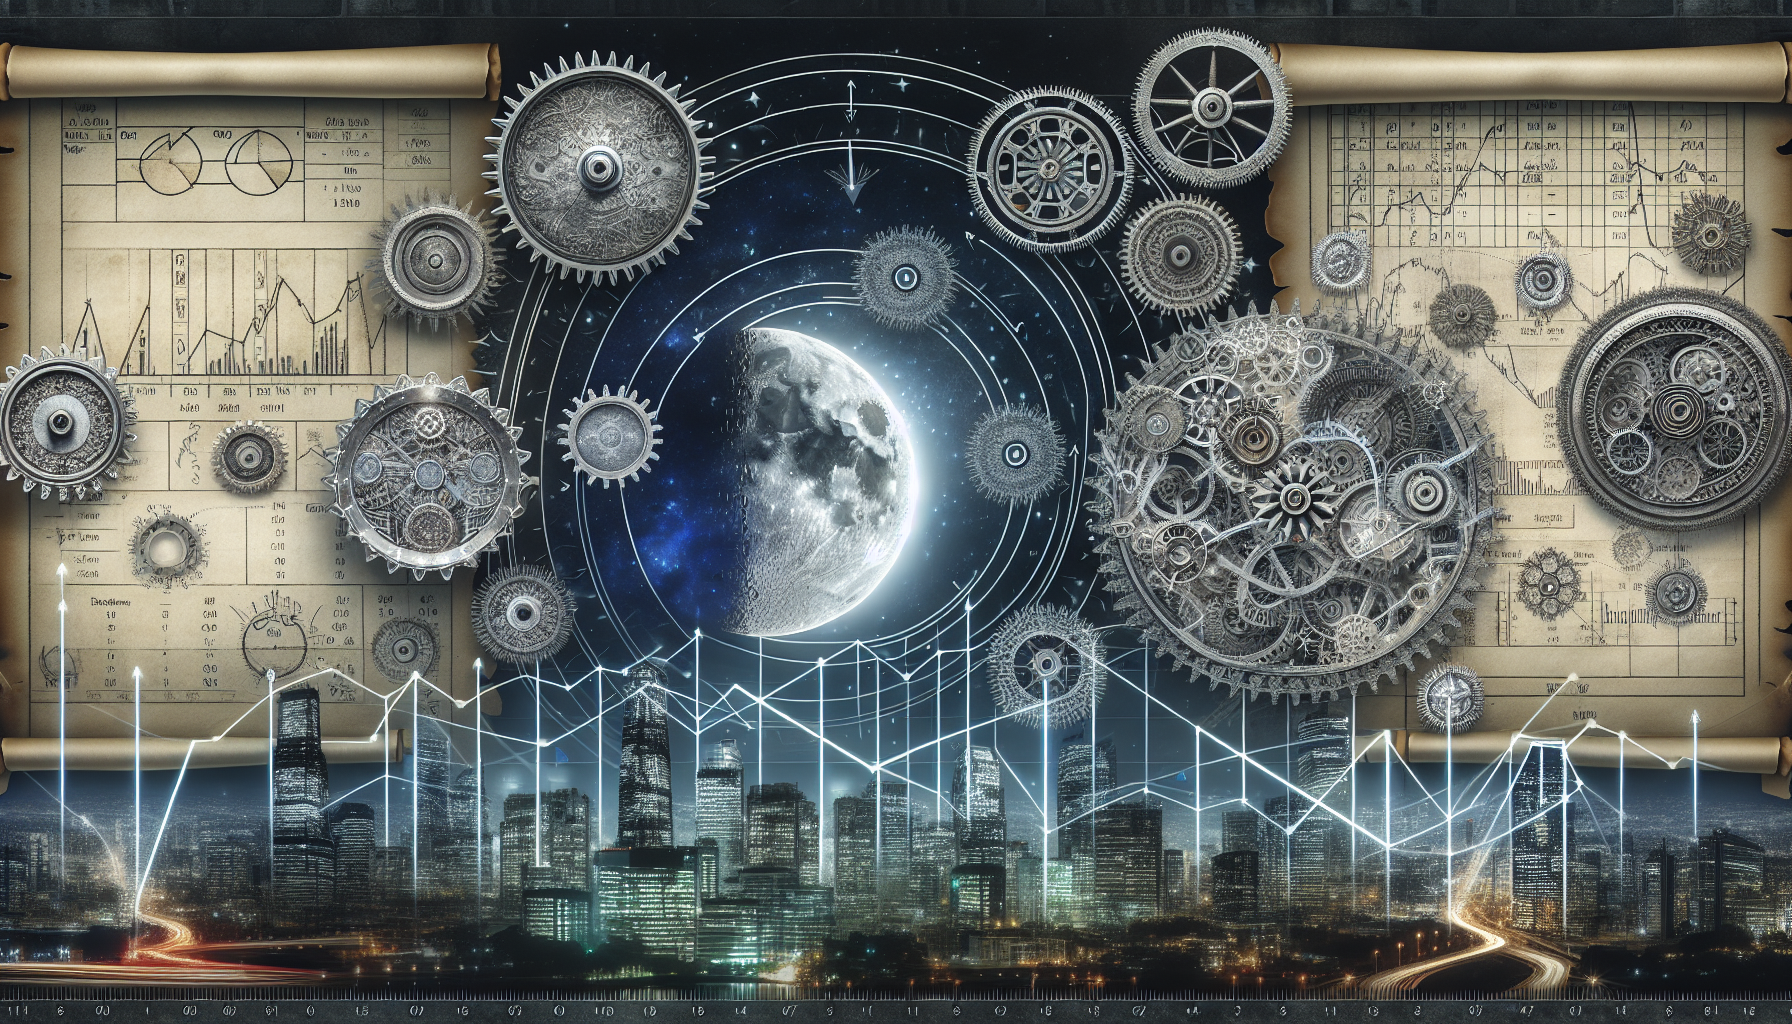 The Heavenly Advisor: The Influence of Lunar Phases on Business Patterns